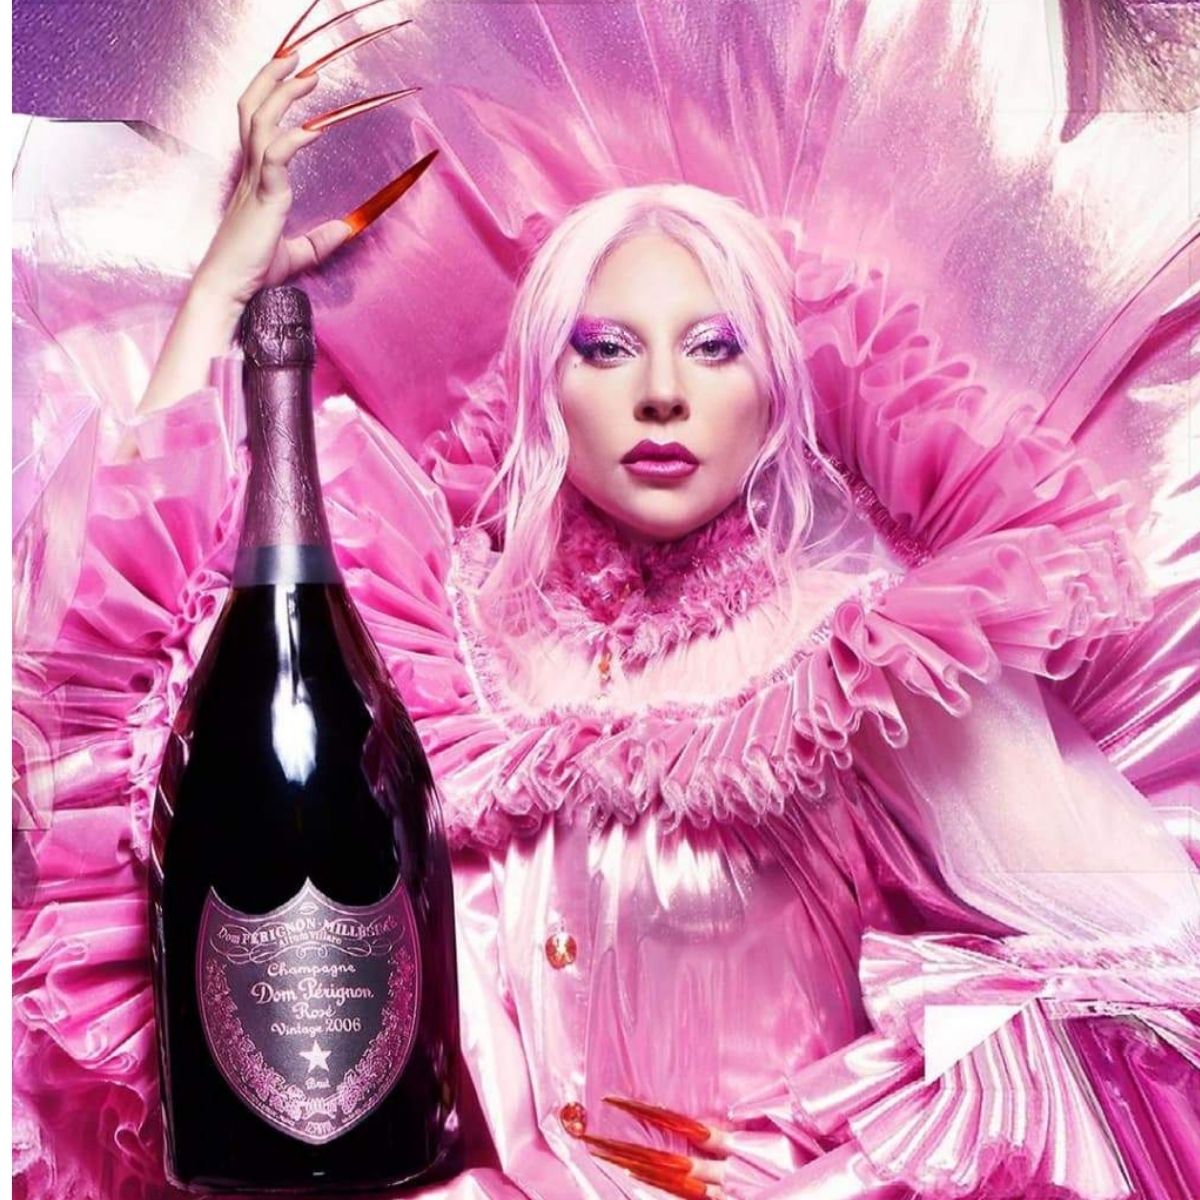 Lady Gaga (Lady Gaga) in a photo shoot for the advertising company "Dom Pérignon"